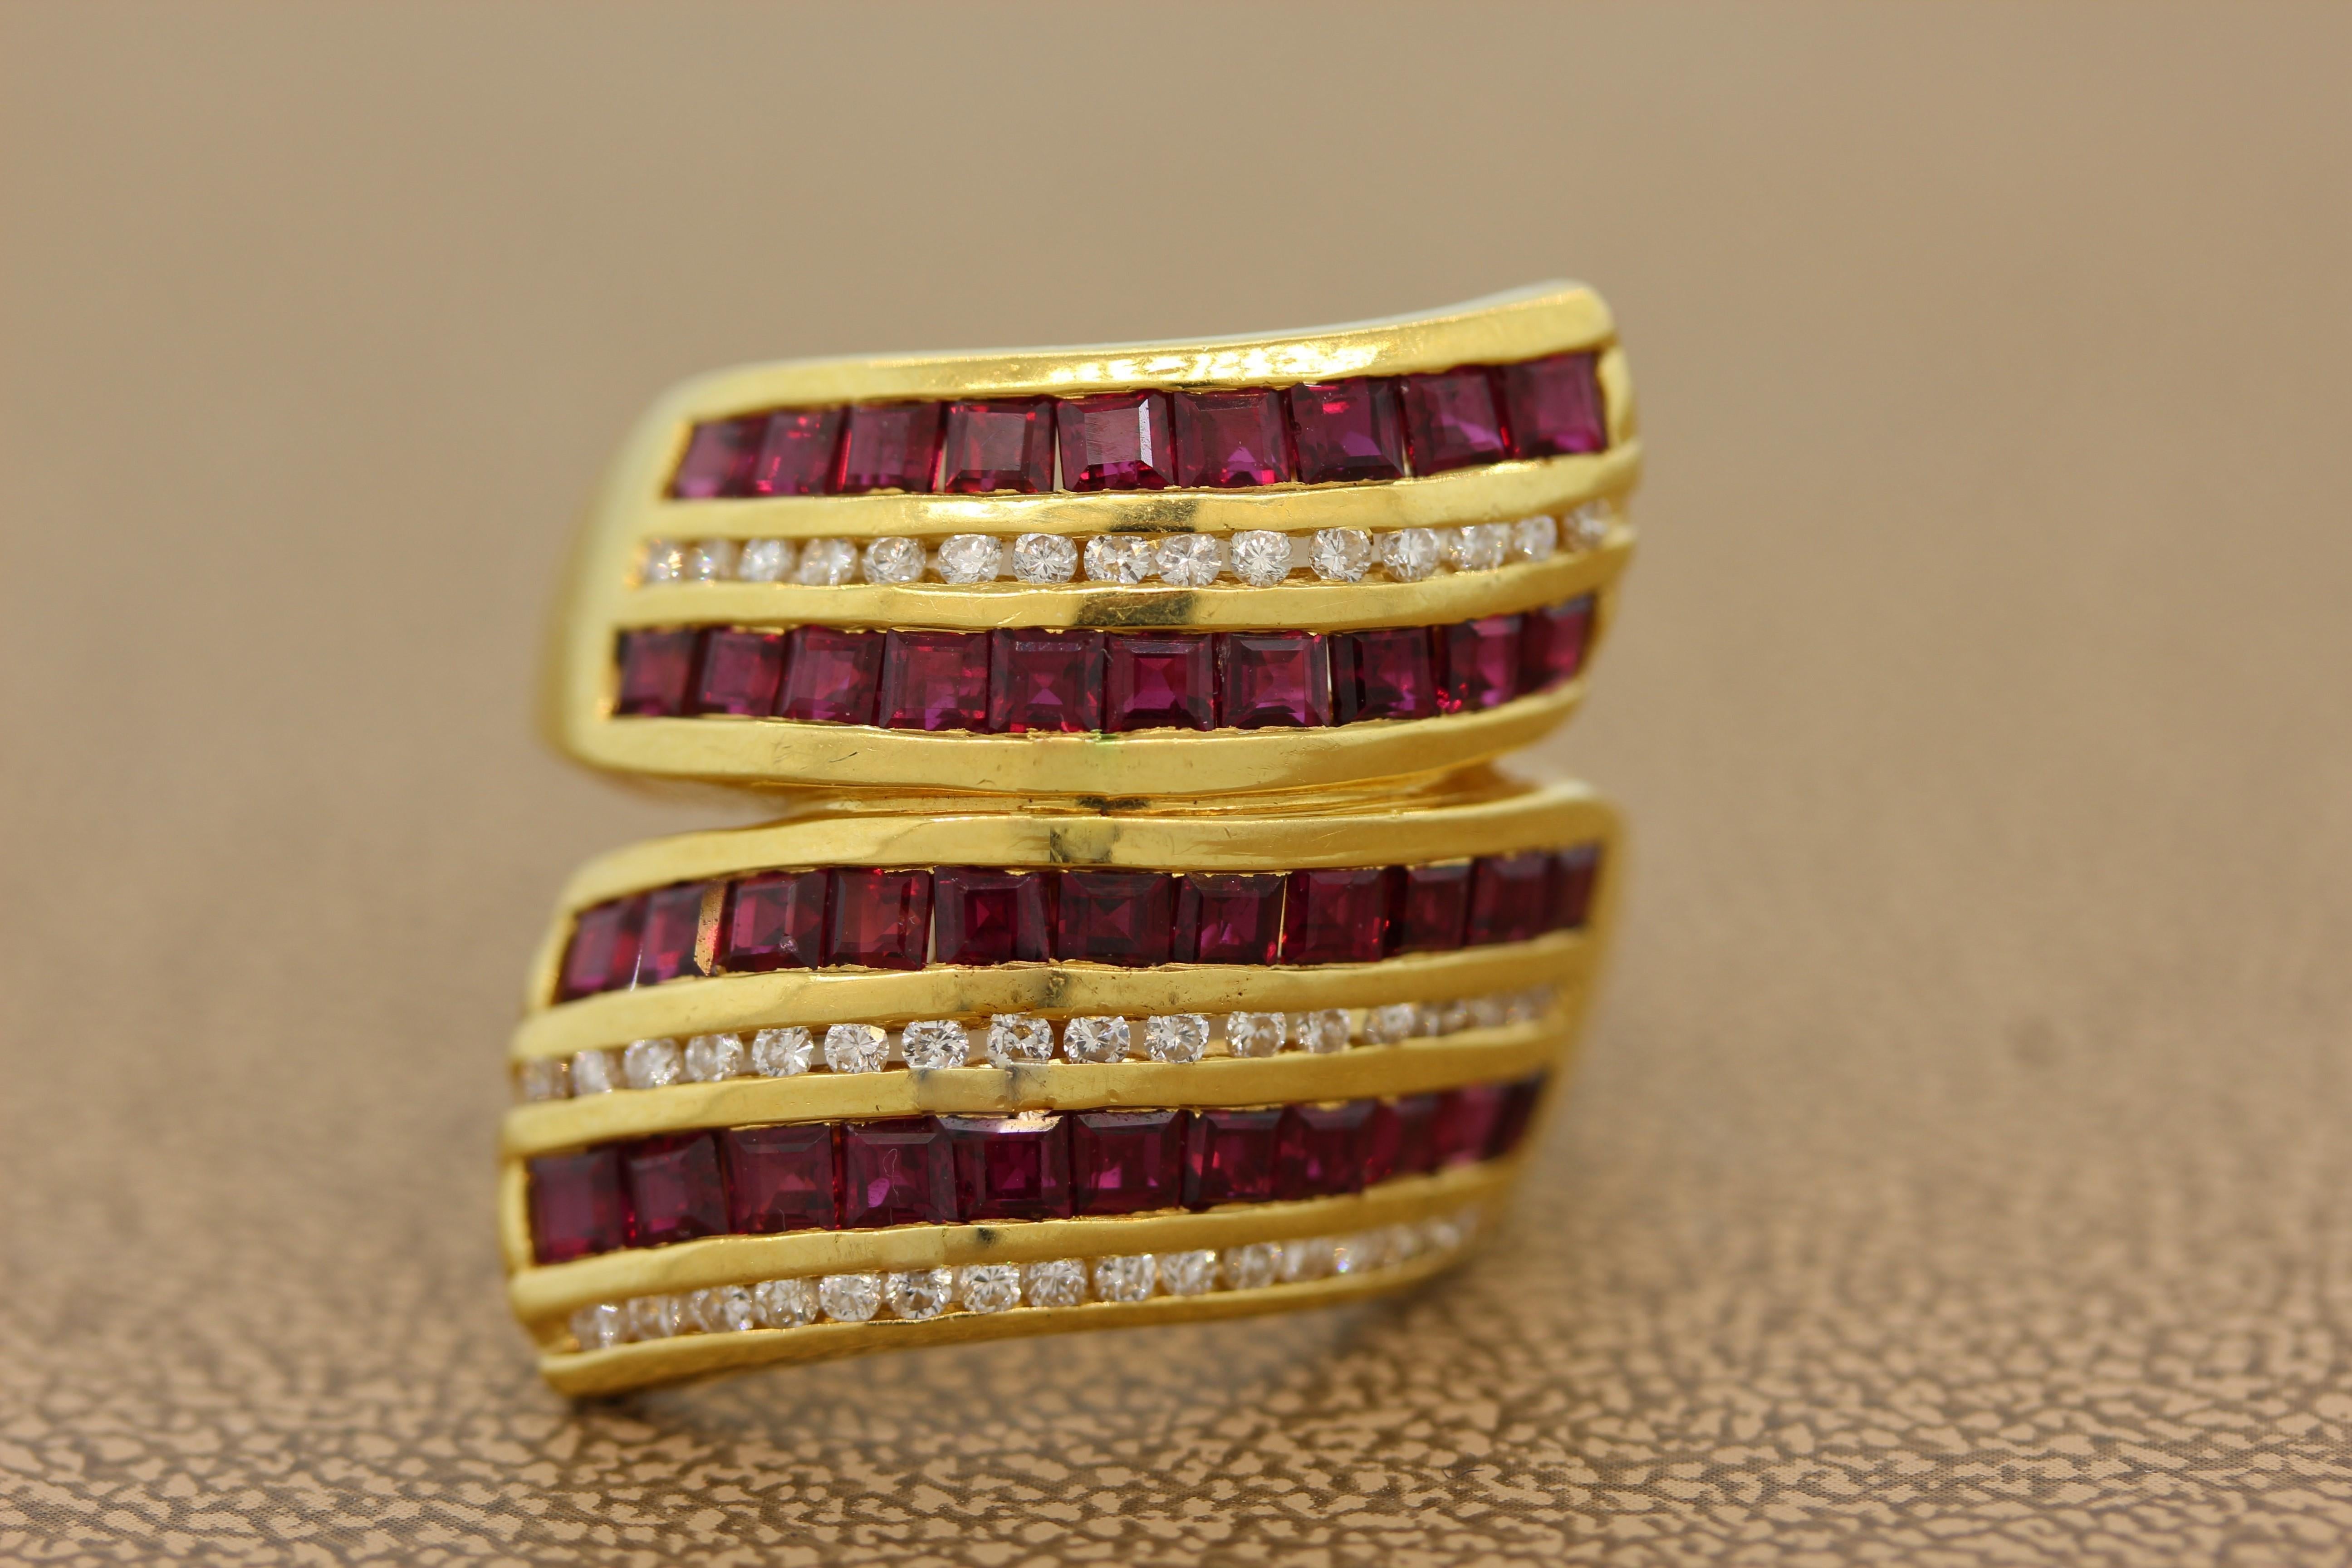 This whimsical cocktail ring features approximately 4.00 carats of rubies with 1.00 carat of diamonds. The channel set princess cut rubies and round cut diamonds are set in an 18K yellow gold spiral.

Ring Size 8 (Sizable)
